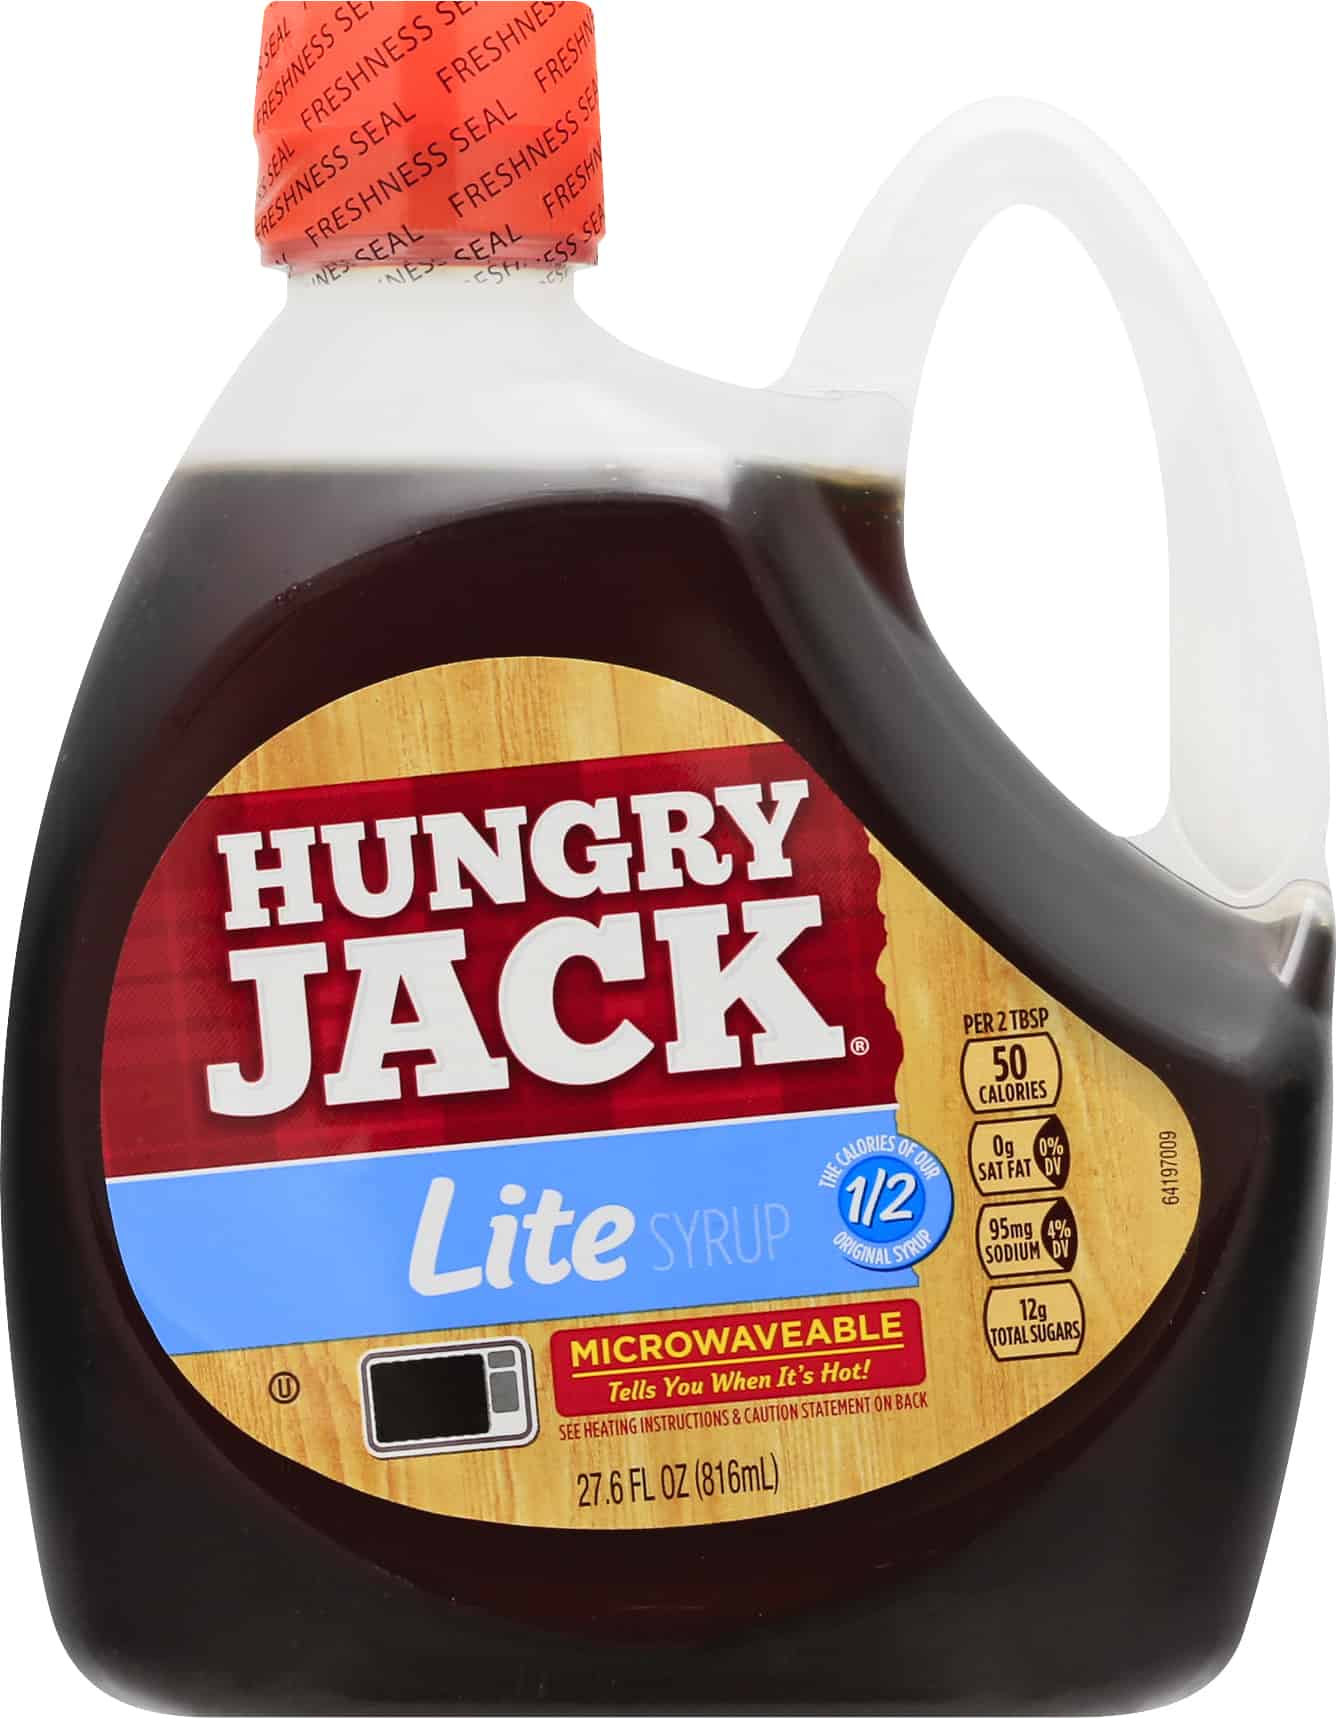 Hungry Jack Syrup Lite 6 units per case 27.6 oz